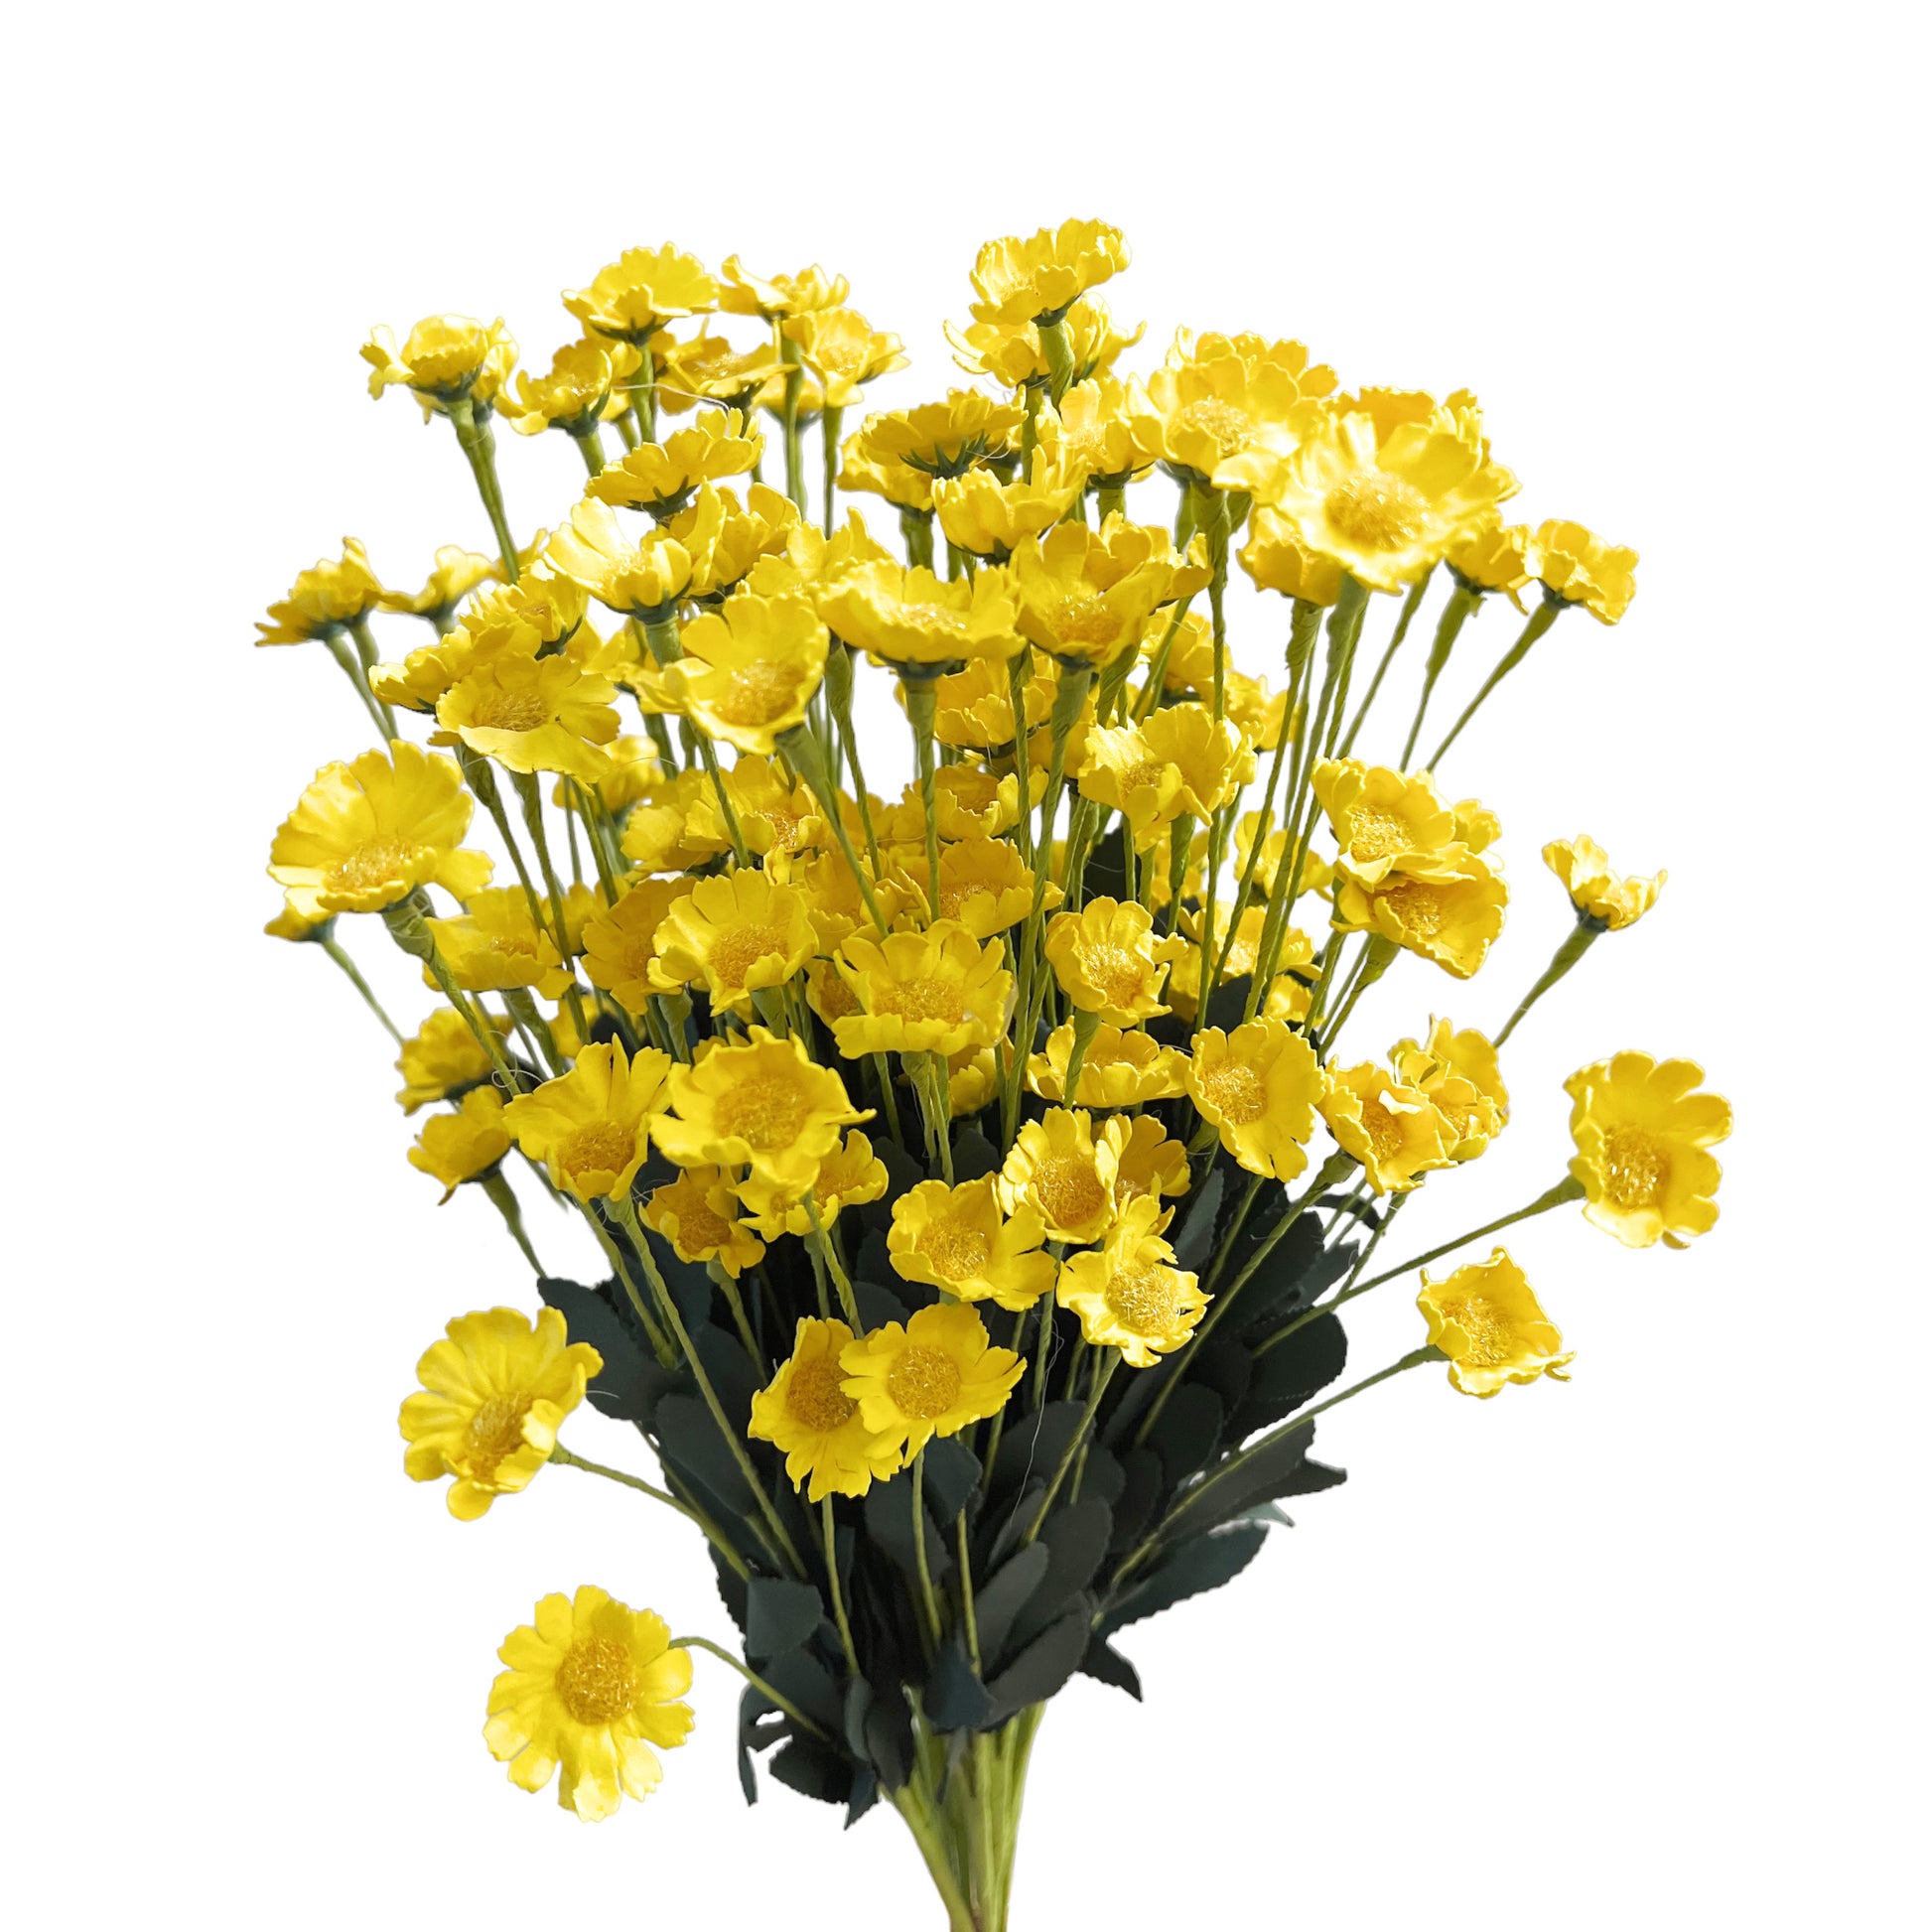 Set of 10 Artificial Daisy Flower Stems in Multiple Colors Yellow